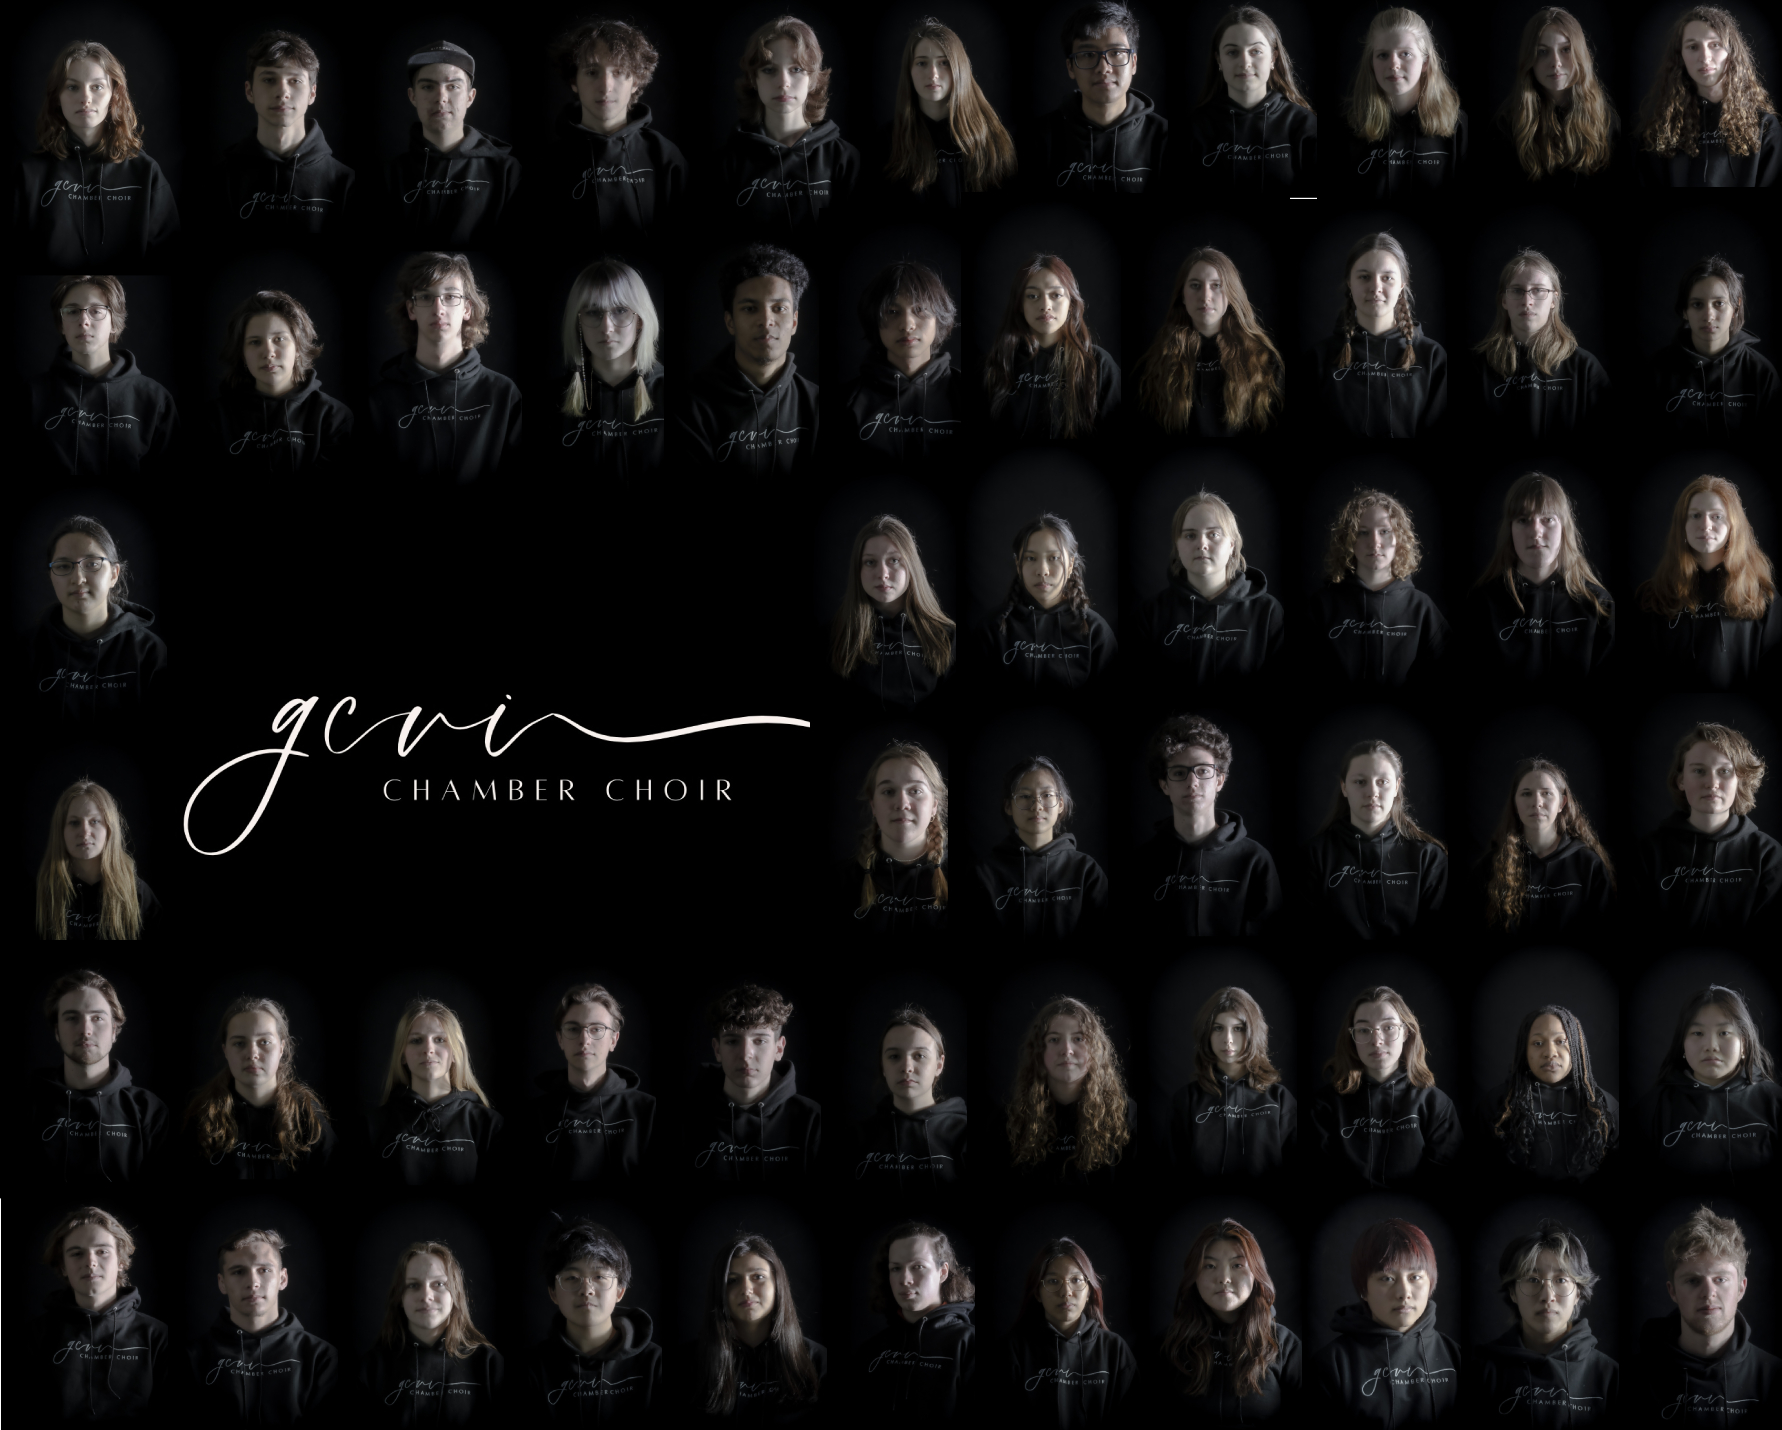 GCVI Chamber Choir is pictured